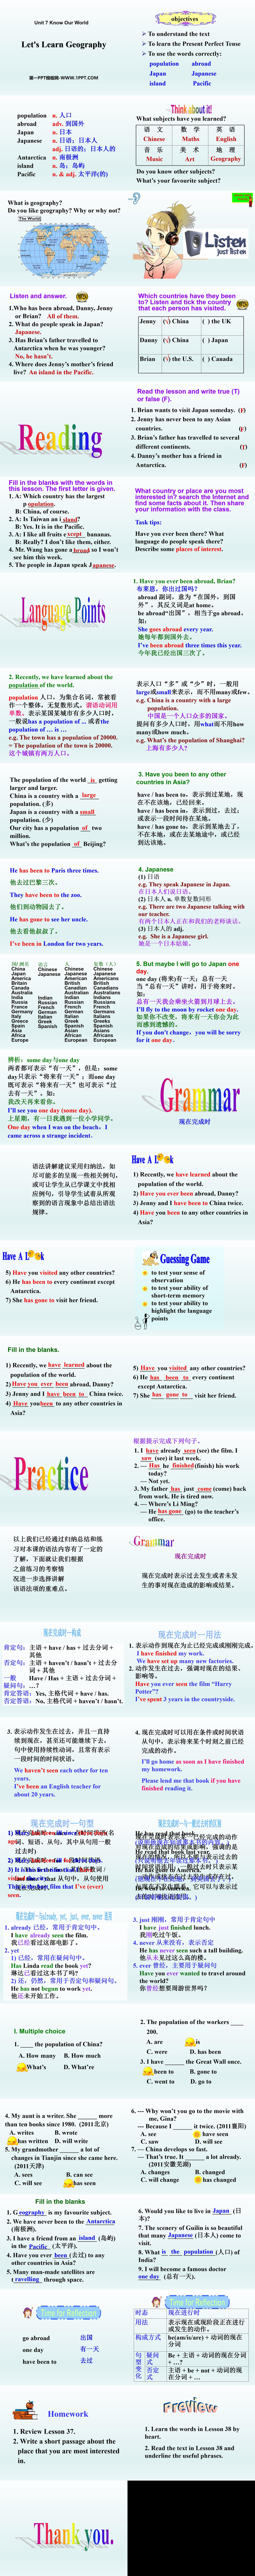 《Let's Learn Geography》Know Our World PPT下载
（2）